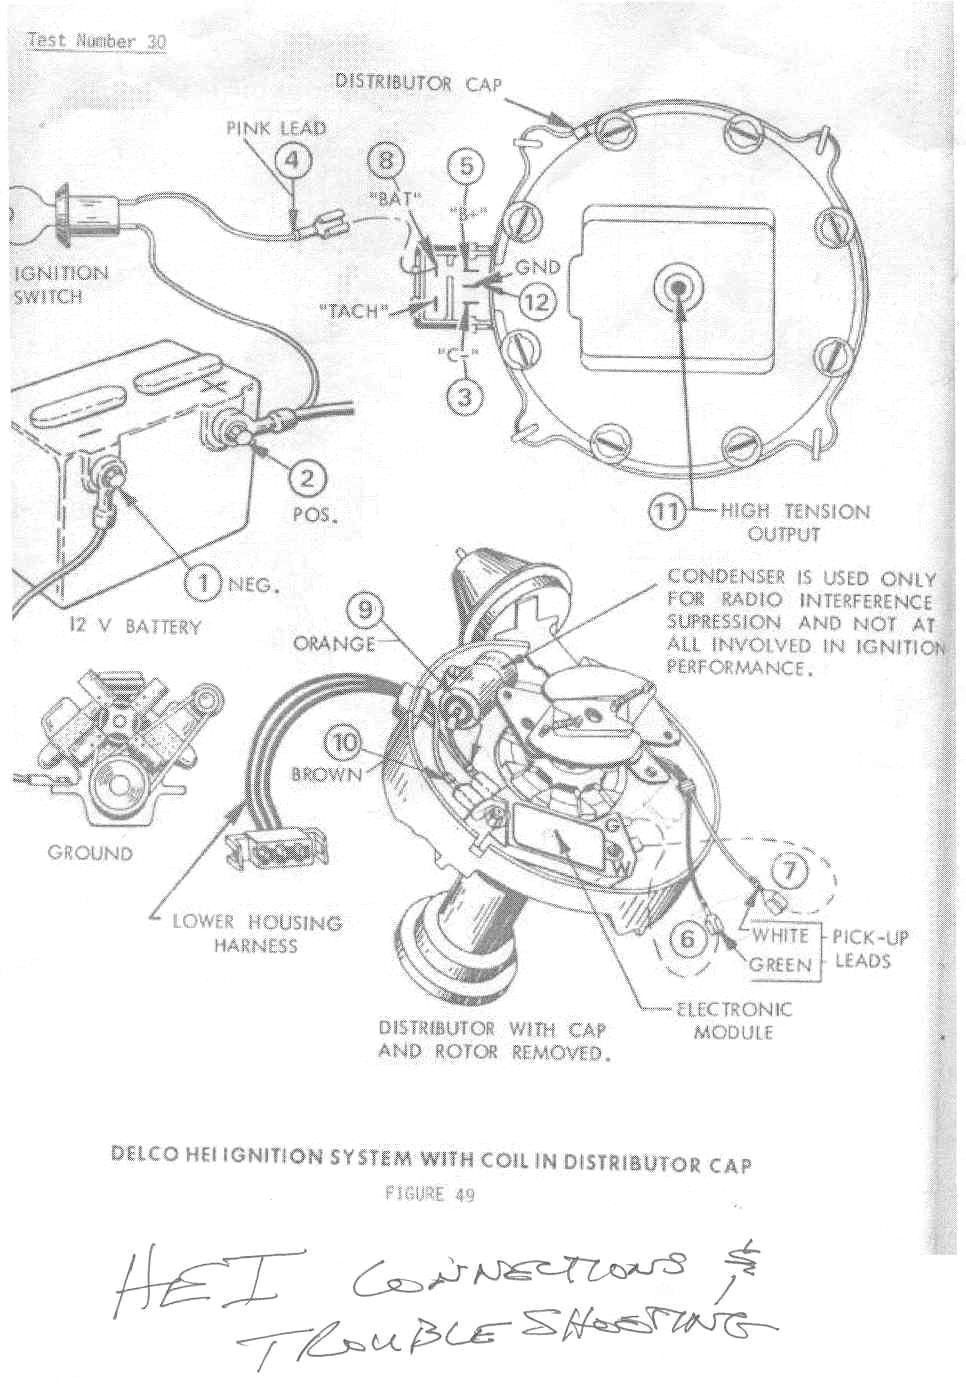 Ignition Coil Distributor Wiring Diagram Database 0 Wiring Diagram Chevy 350 Distributor Cap